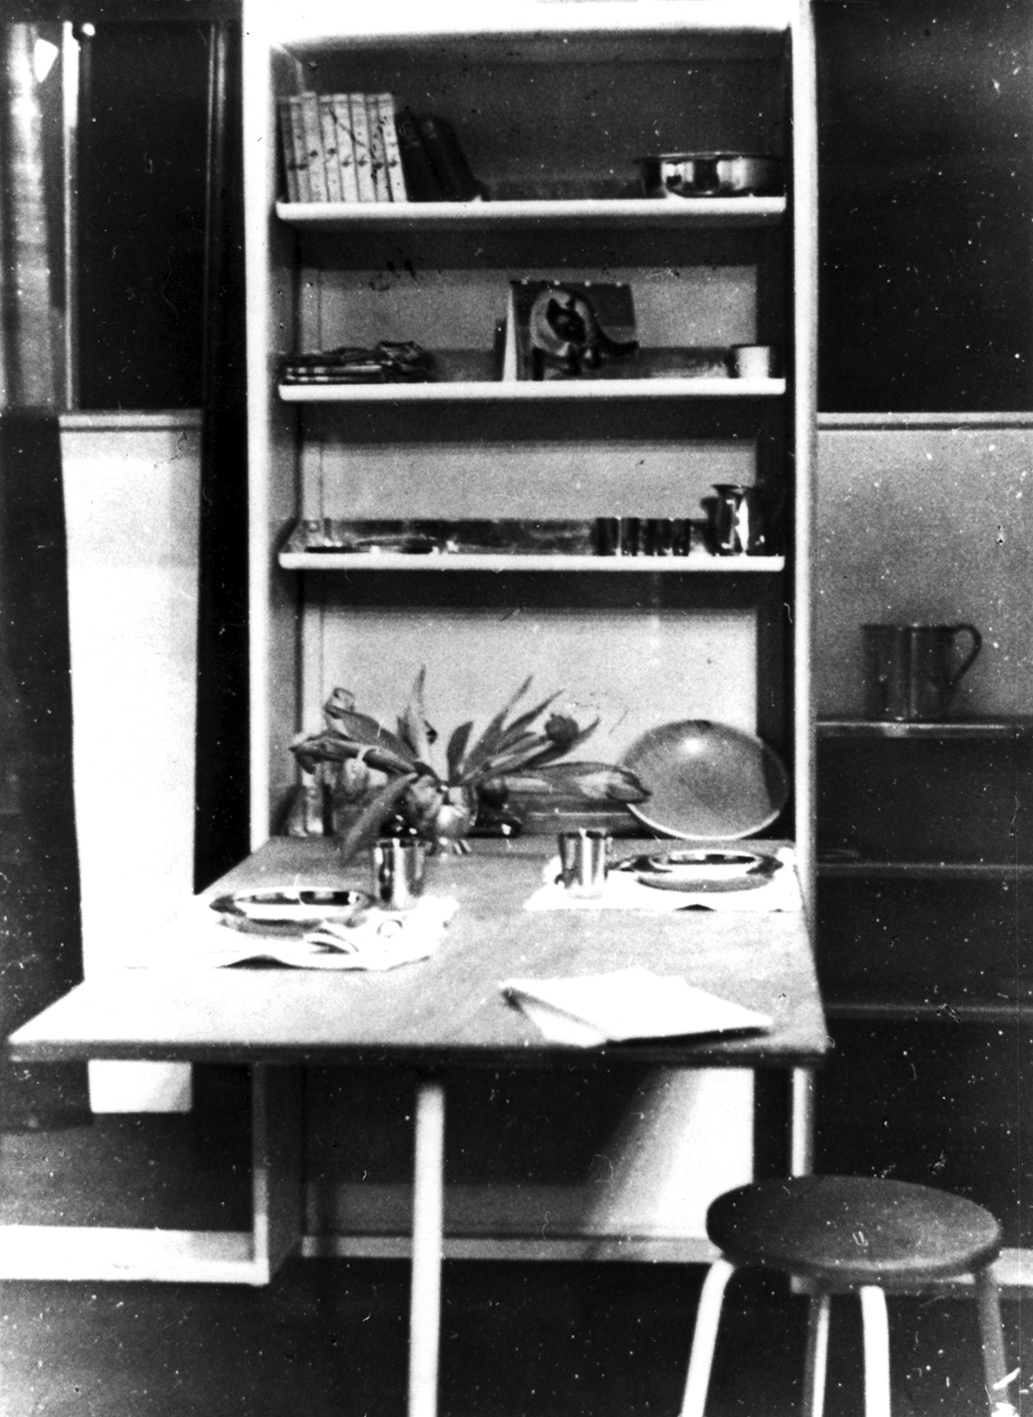 Demountable week-end house BLPS (architects E. Beaudouin and M. Lods, designer Ateliers Jean Prouvé, constructor Les Forges de Strasbourg, 1937). Interior of the prototype presented at the Salon des Arts Ménagers, 1938: shelves and adjustable table.